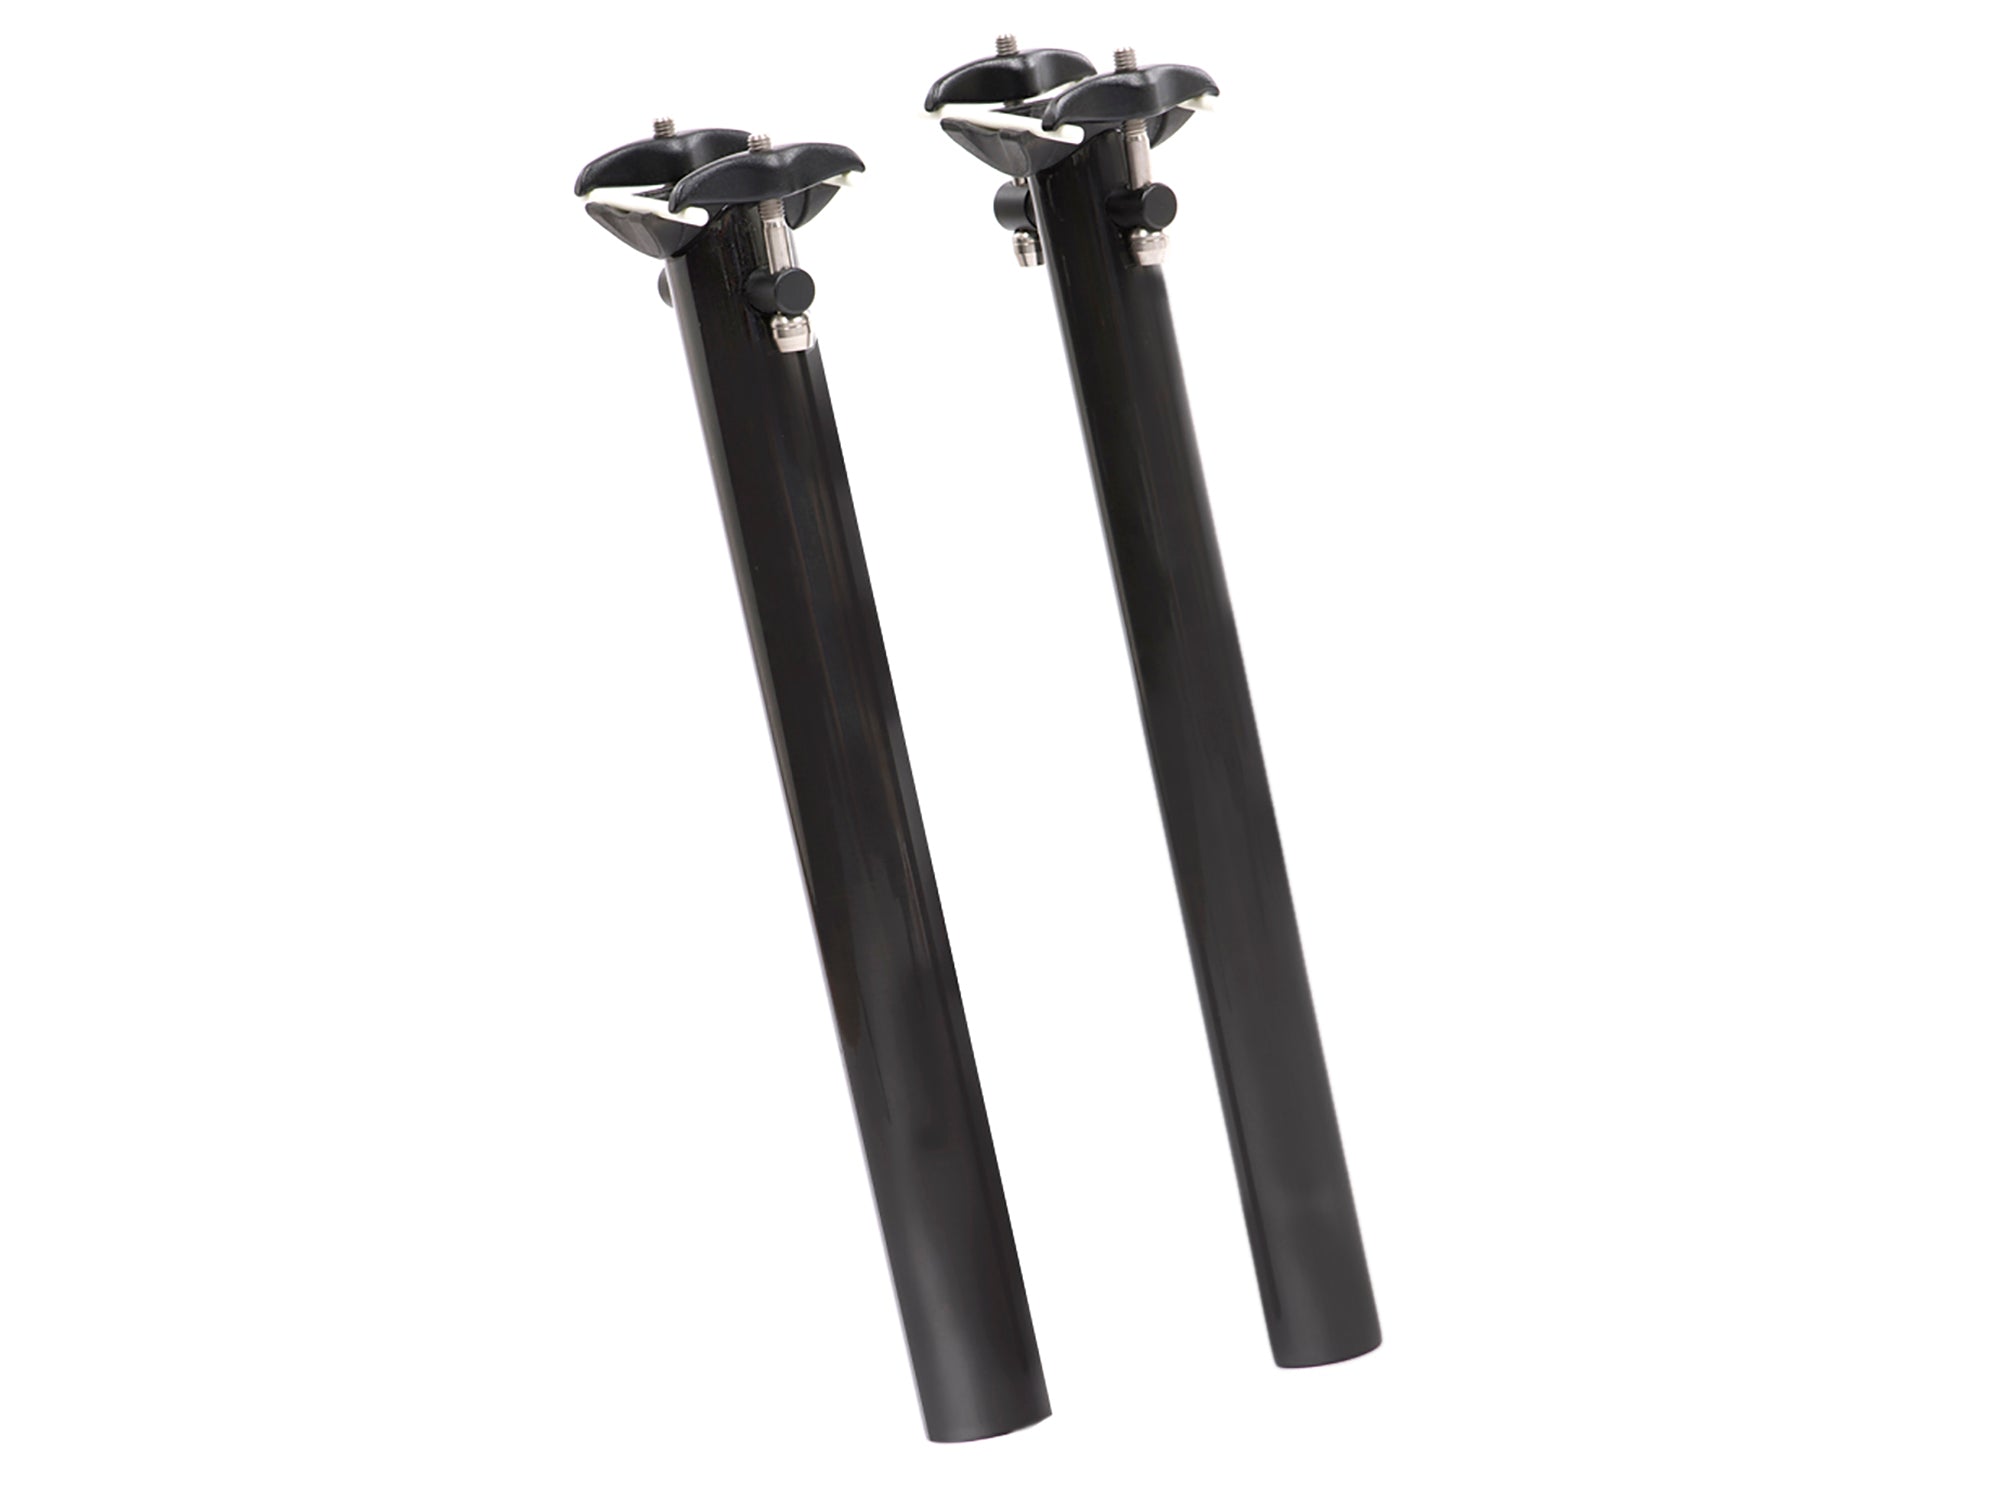 Two carbon seat posts iwth fixings on white background.